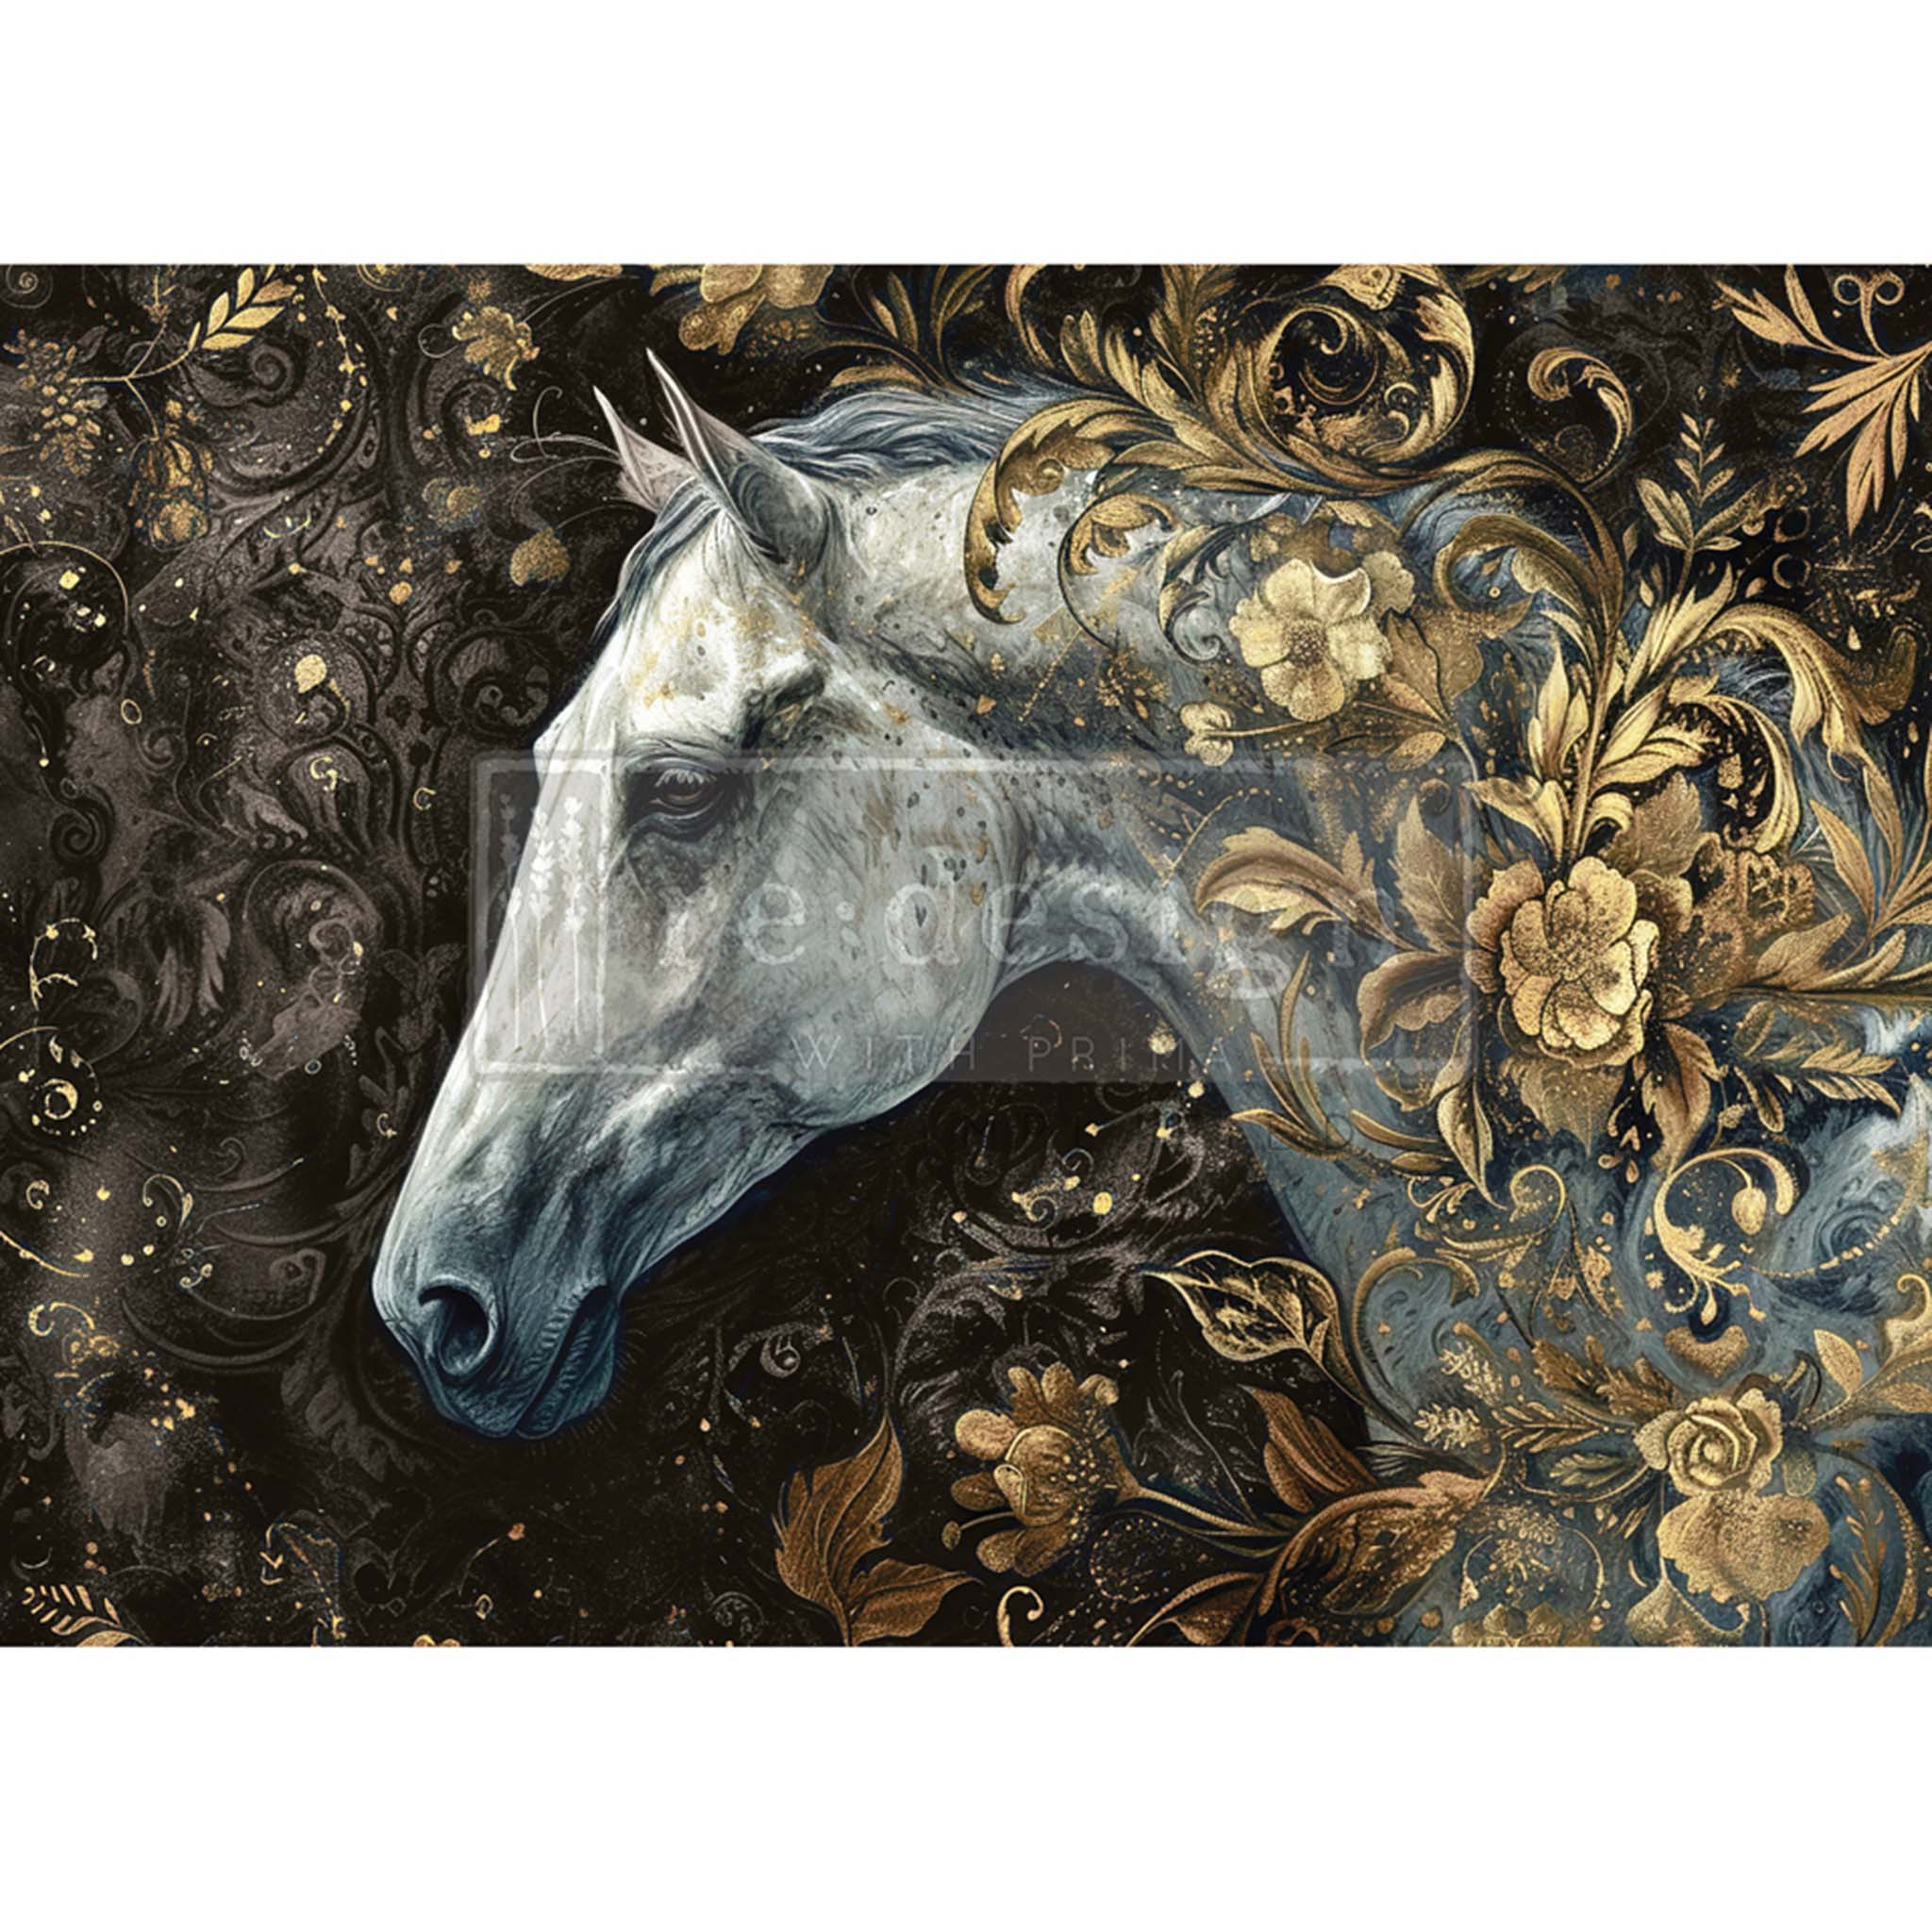 A1 fiber paper that features a regal white horse on a black background, adorned with elegant golden scrolling leaves and flowers. White borders are on the top and bottom.